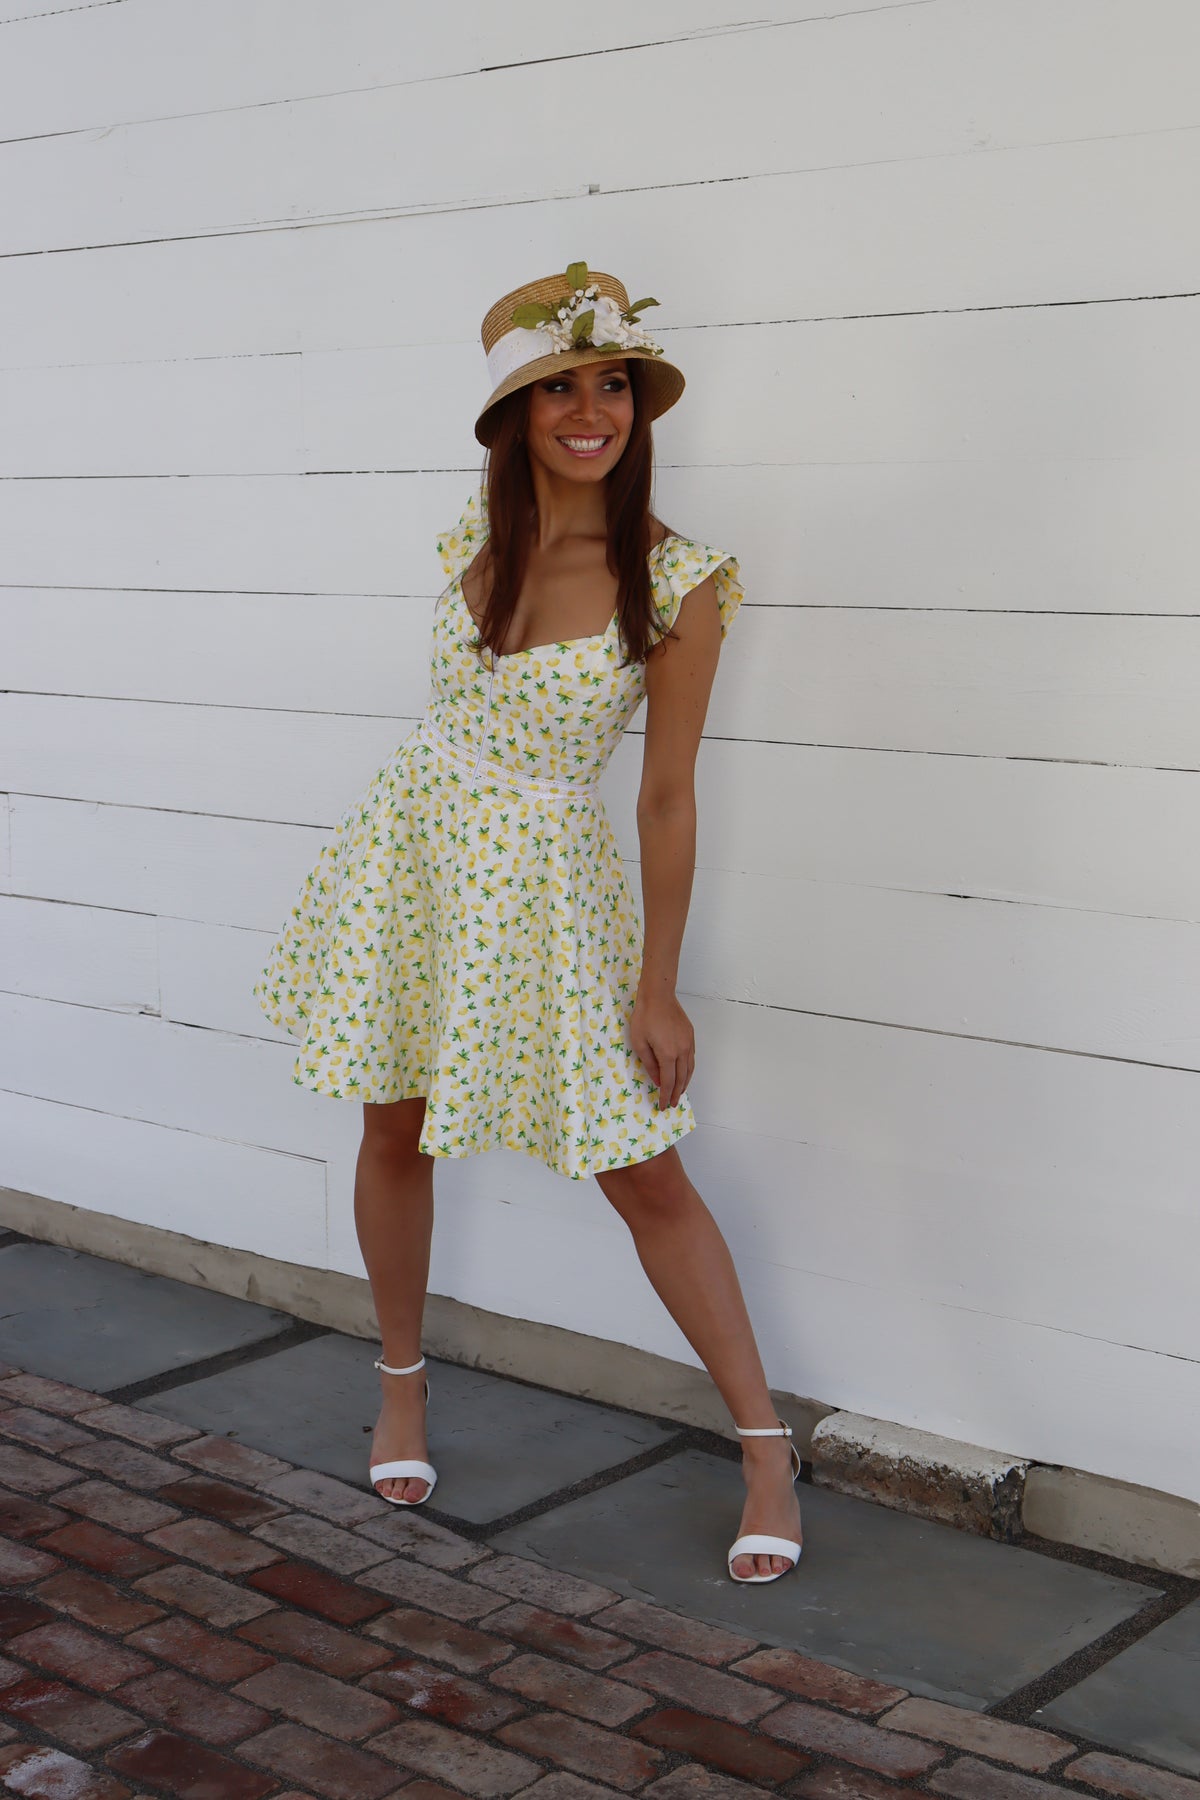 Model in lemon print dress wearing a straw hat in front of a white wall, smiling and looking off to the side.